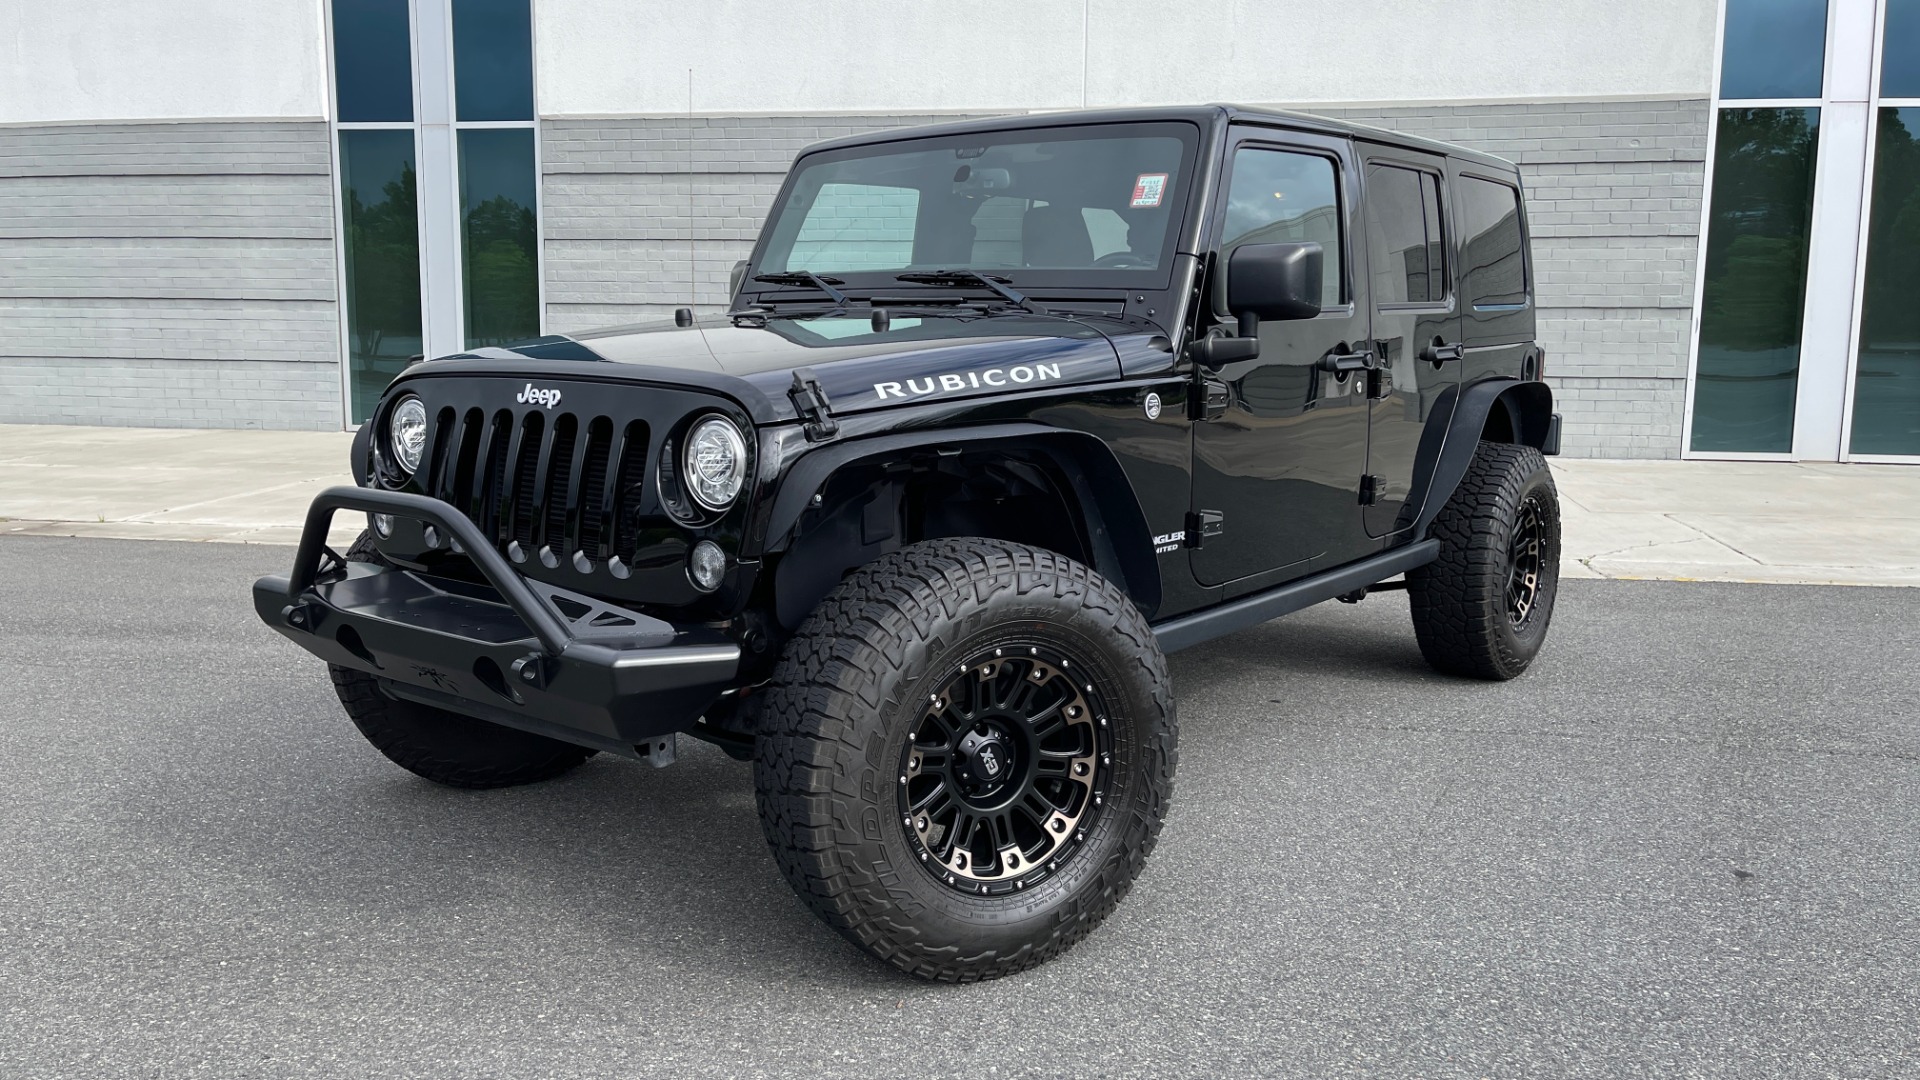 Used 2017 Jeep WRANGLER UNLIMITED RUBICON 4X4 / TOW PKG / HTD STS / ALPINE SOUND for sale Sold at Formula Imports in Charlotte NC 28227 1